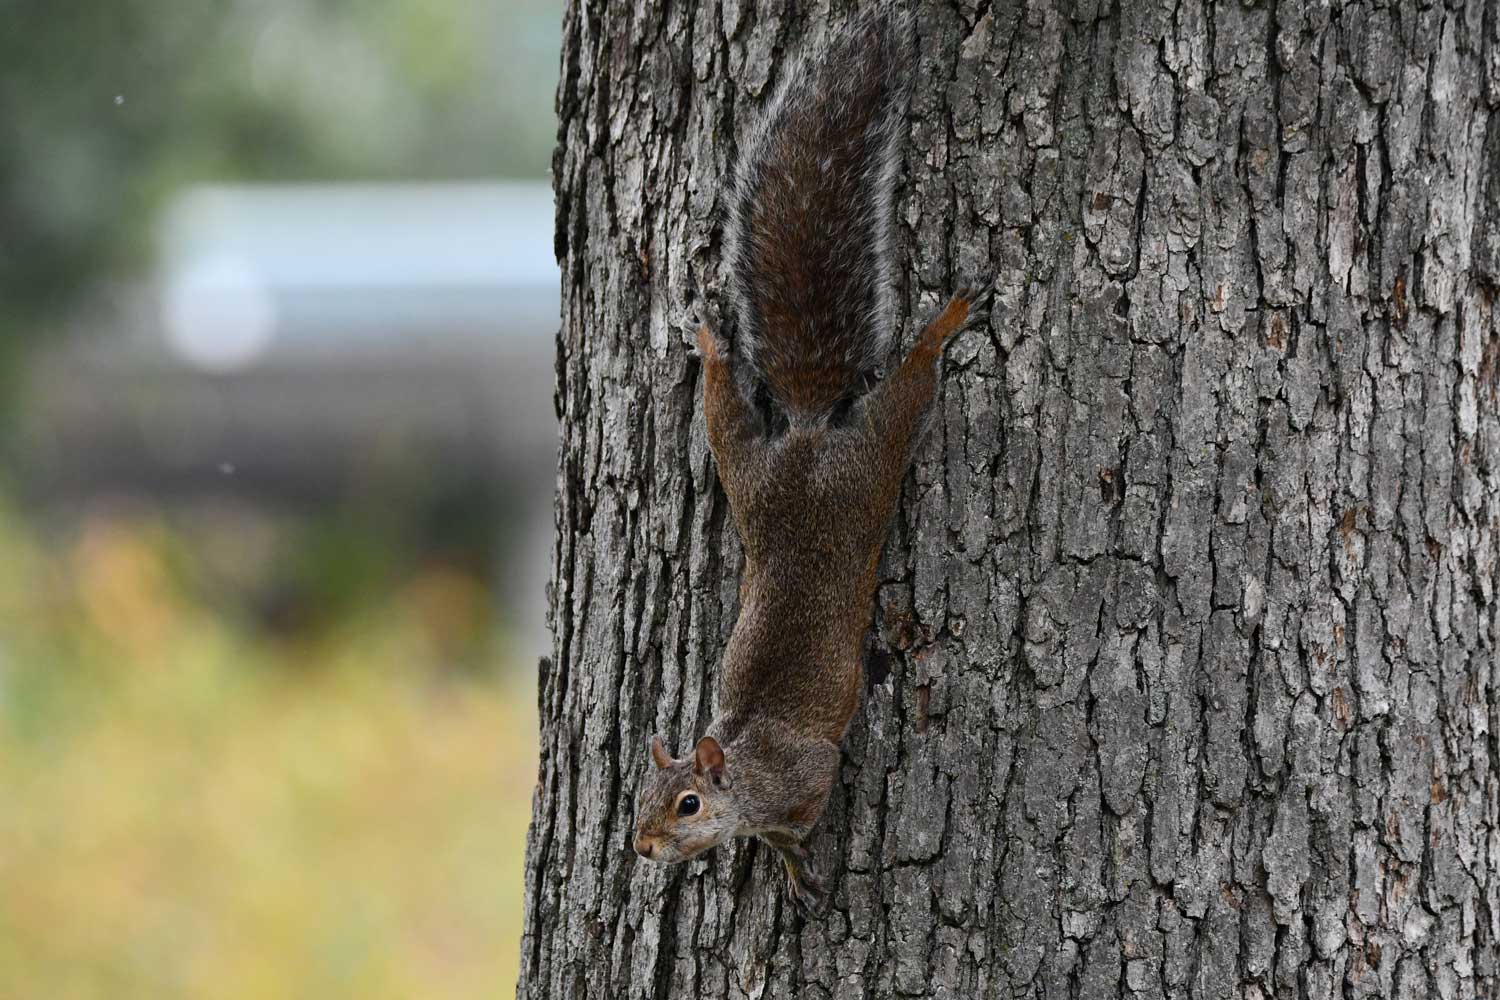 A squirrel flattened against a tree trunk while climbing down it.